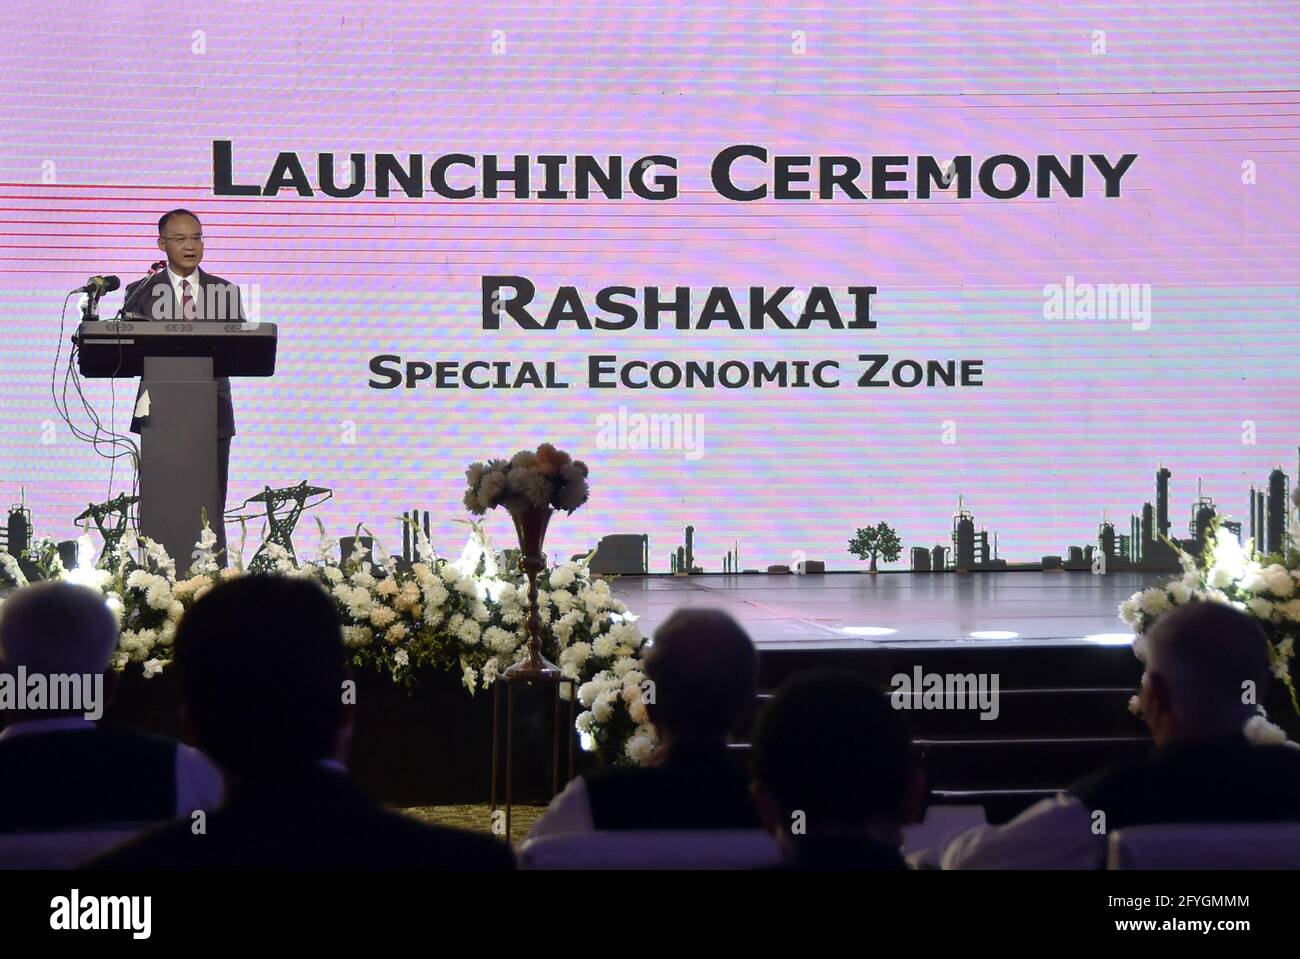 (210528) -- RASHAKAI, May 28, 2021 (Xinhua) -- Chinese Ambassador to Pakistan Nong Rong addresses the launching ceremony of Rashakai Special Economic Zone (SEZ) in Rashakai, Pakistan, on May 28, 2021. Pakistani Prime Minister Imran Khan said on Friday that the special economic zones (SEZs) under the China-Pakistan Economic Corridor (CPEC) will promote industrialization of his country and uplift its economy. Credit: Xinhua/Alamy Live News Stock Photo